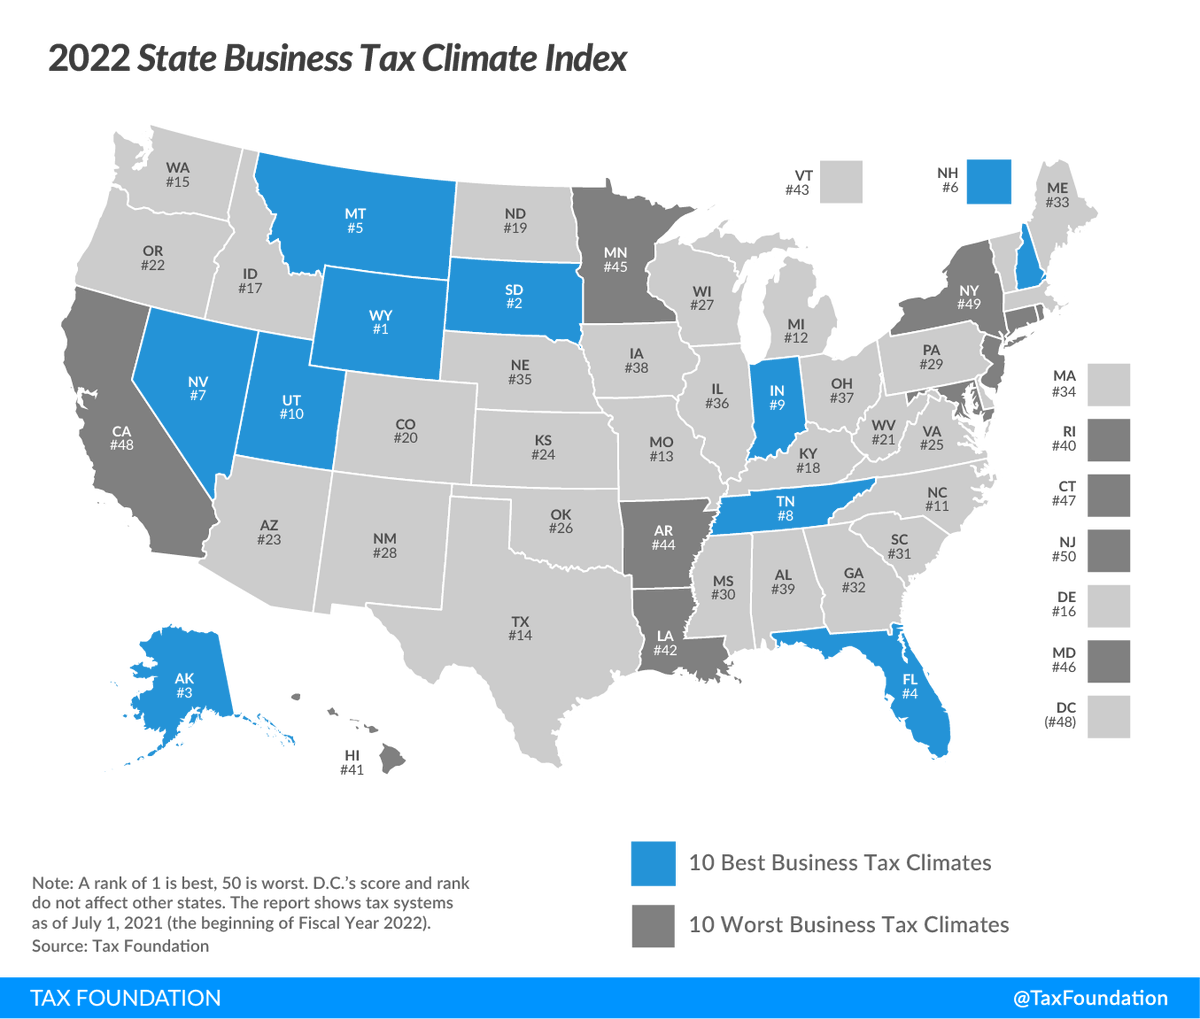 NEW: CT has the 4th-worst business tax climate in the US for 2022, according to @TaxFoundation. Imagine how well our state could do if we had new policies that encouraged job creation and investment here. 